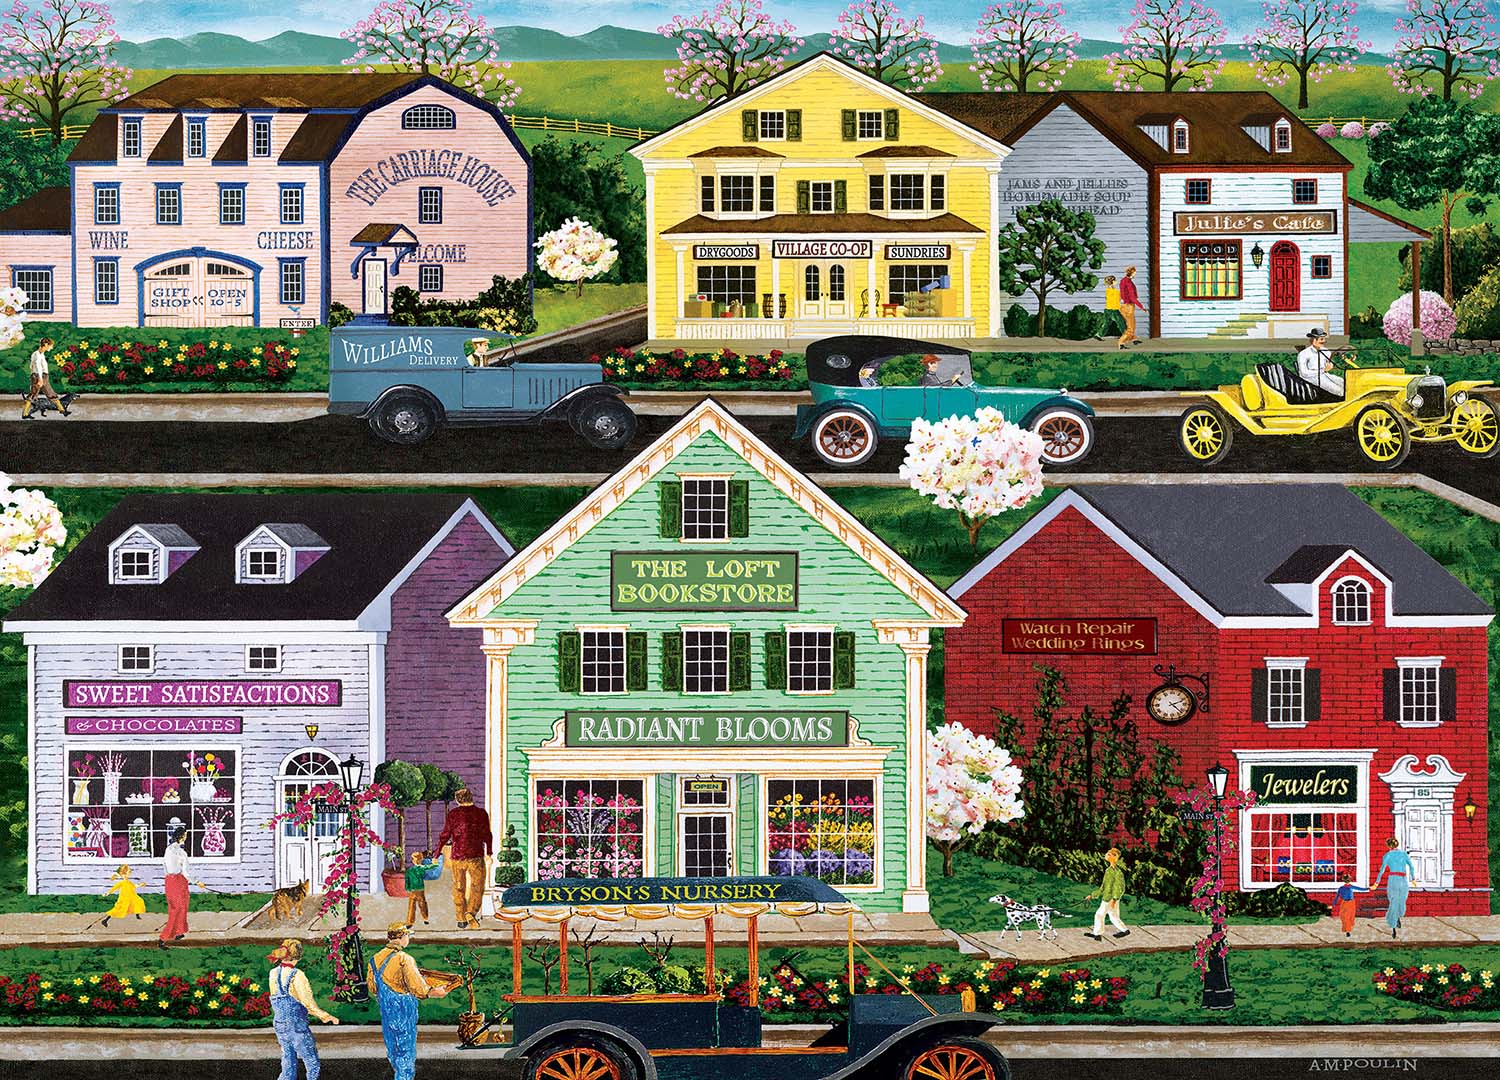 Day Trip Countryside Jigsaw Puzzle